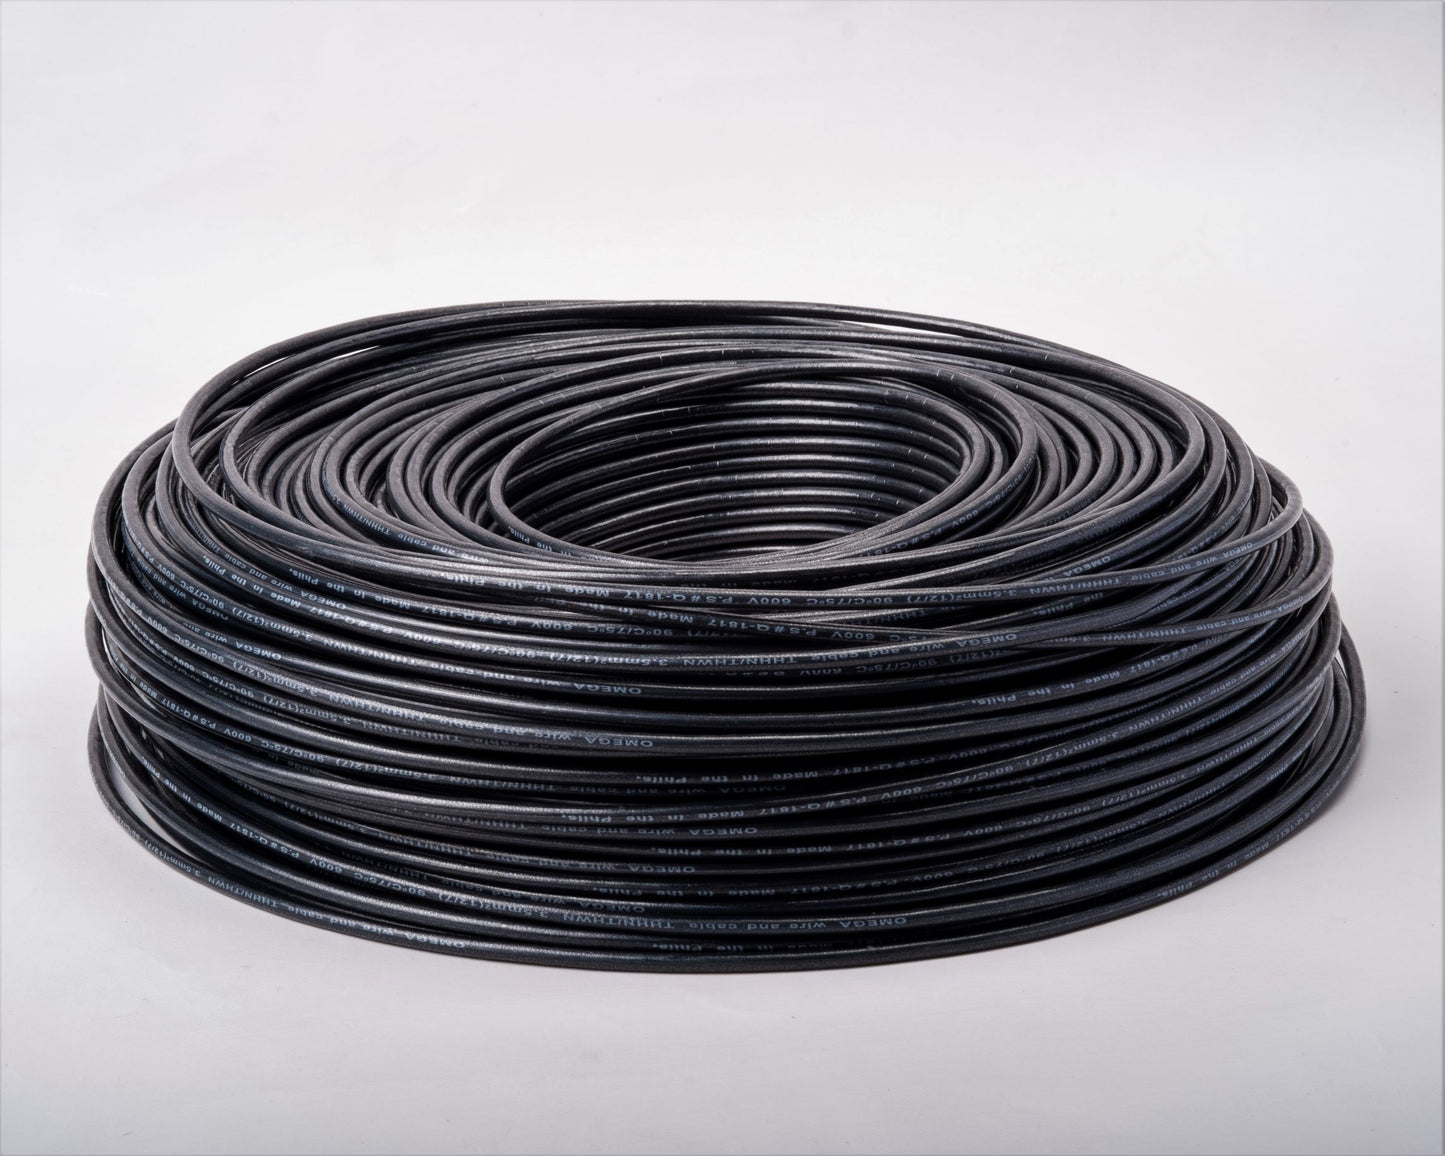 OMEGA THHN WIRES 12/7 (3.5mm²)